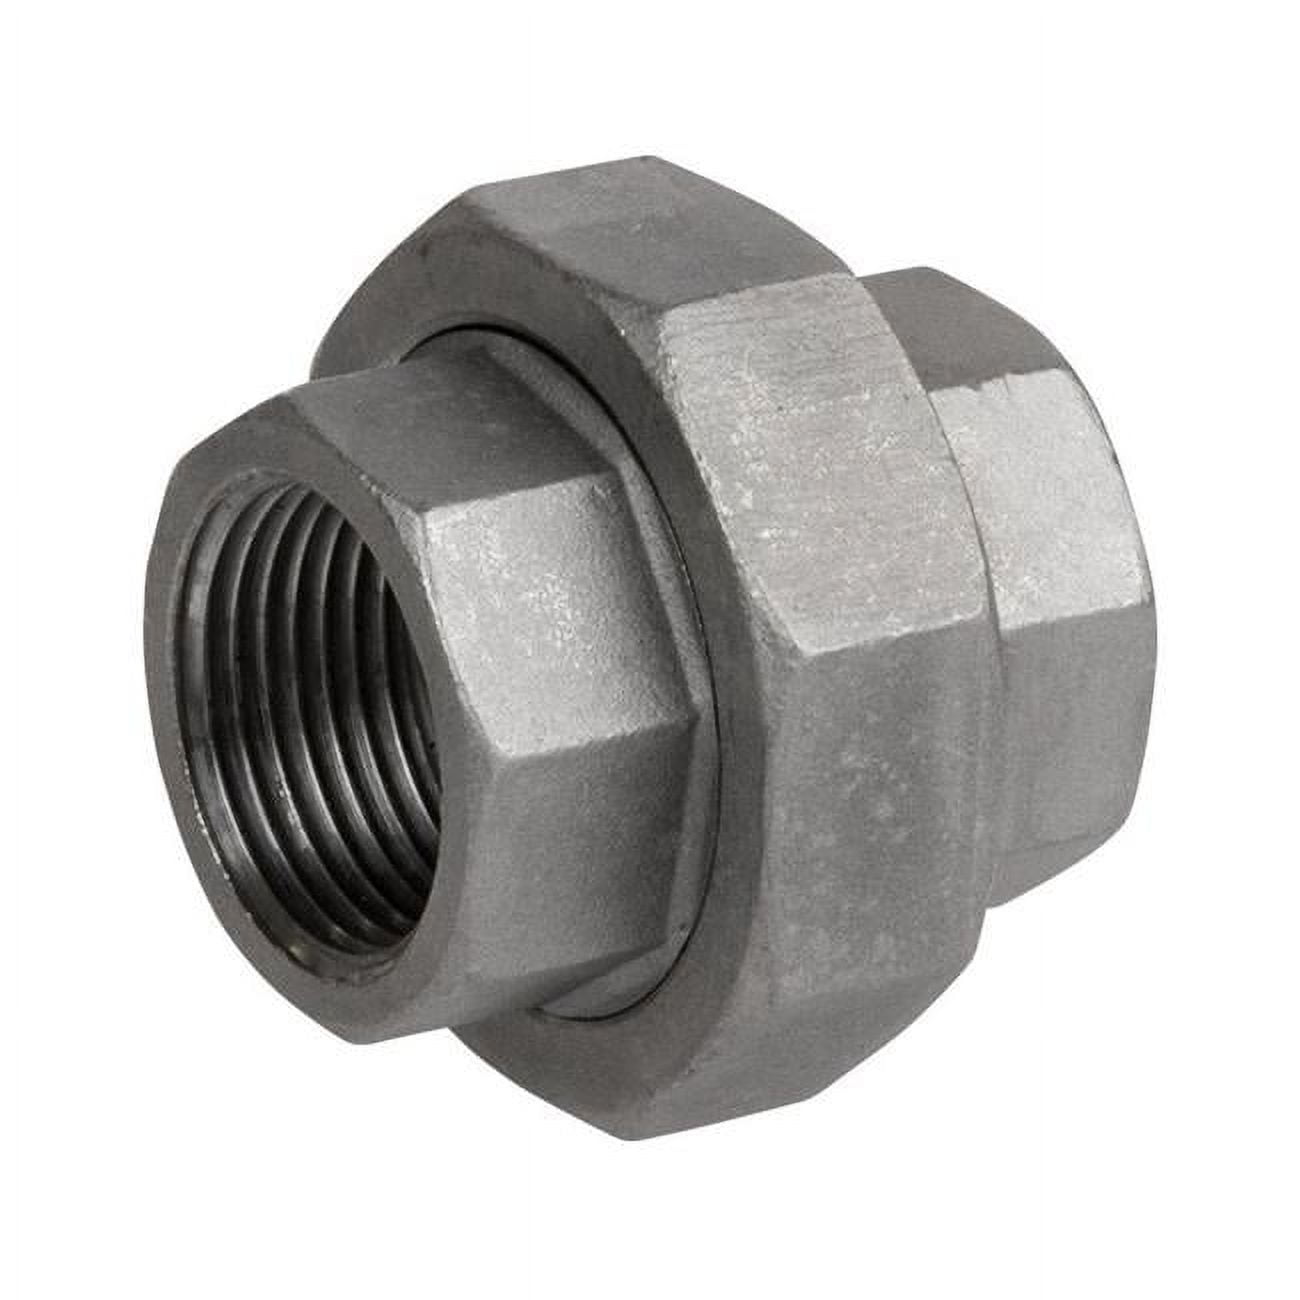 4868378 1.5 In. Fpt X 1.5 In. Dia. Fpt Stainless Steel Union